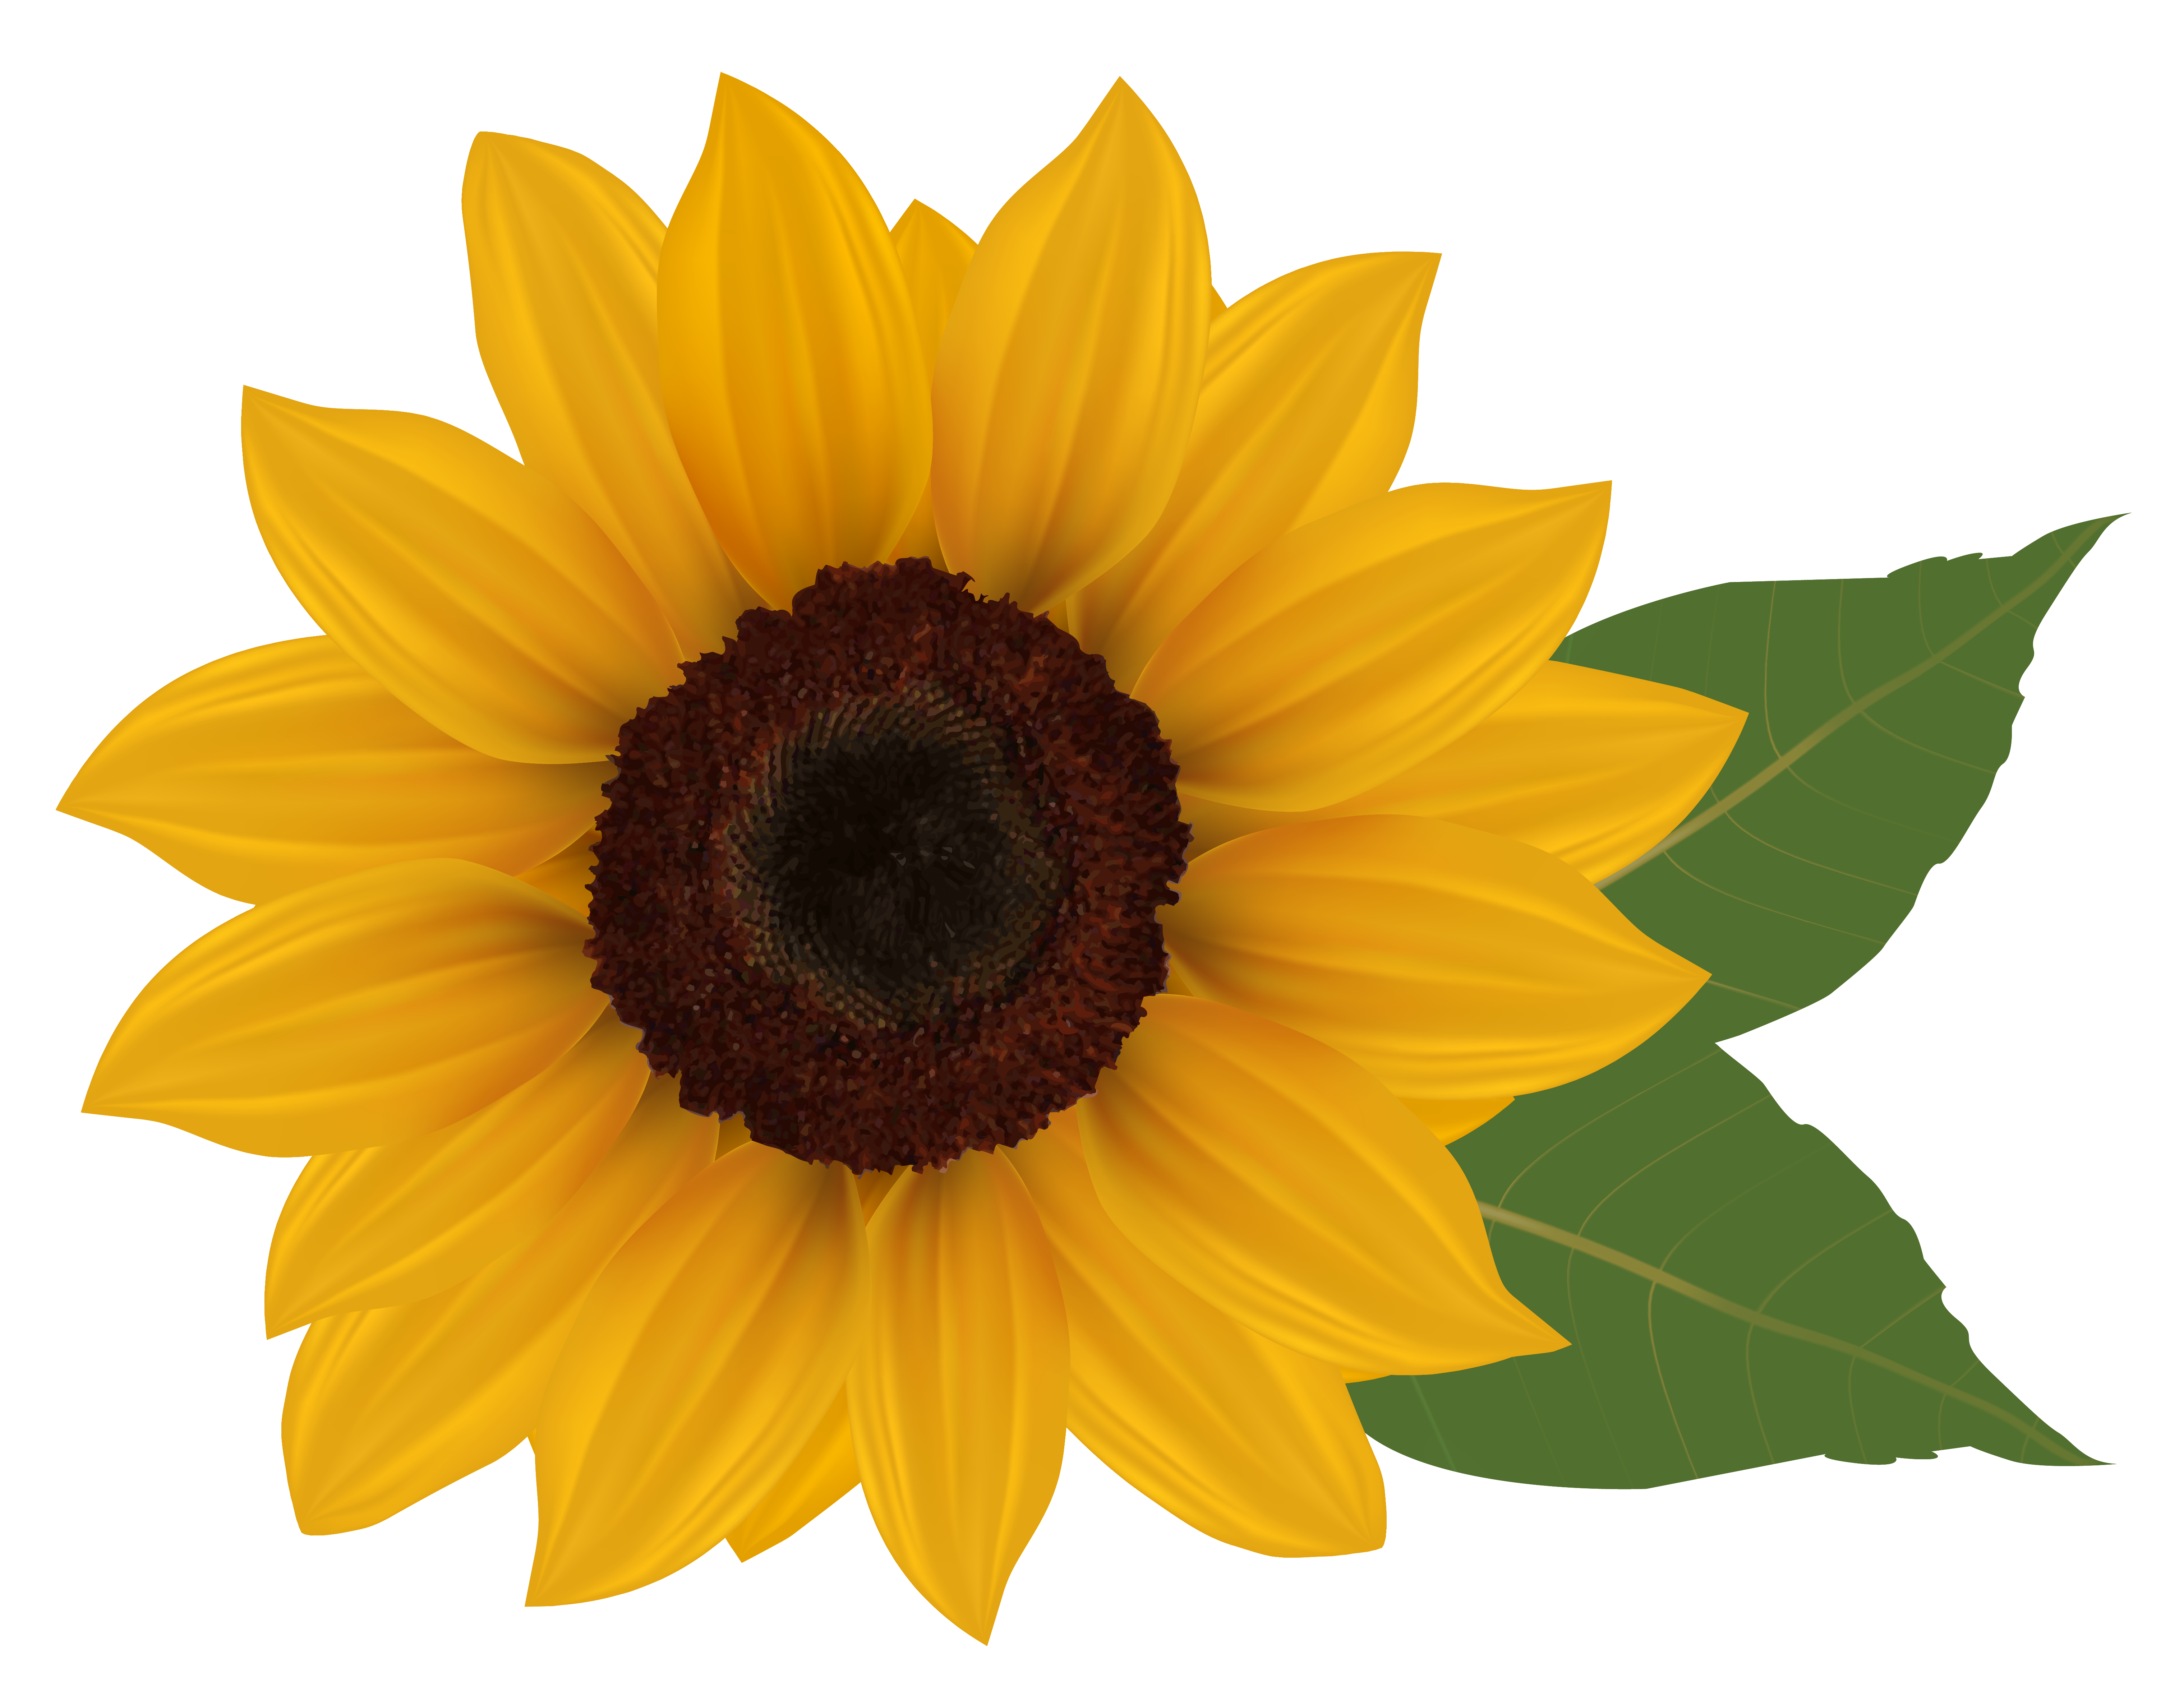 Daisies clipart face. Sunflower profile clipground tattoo